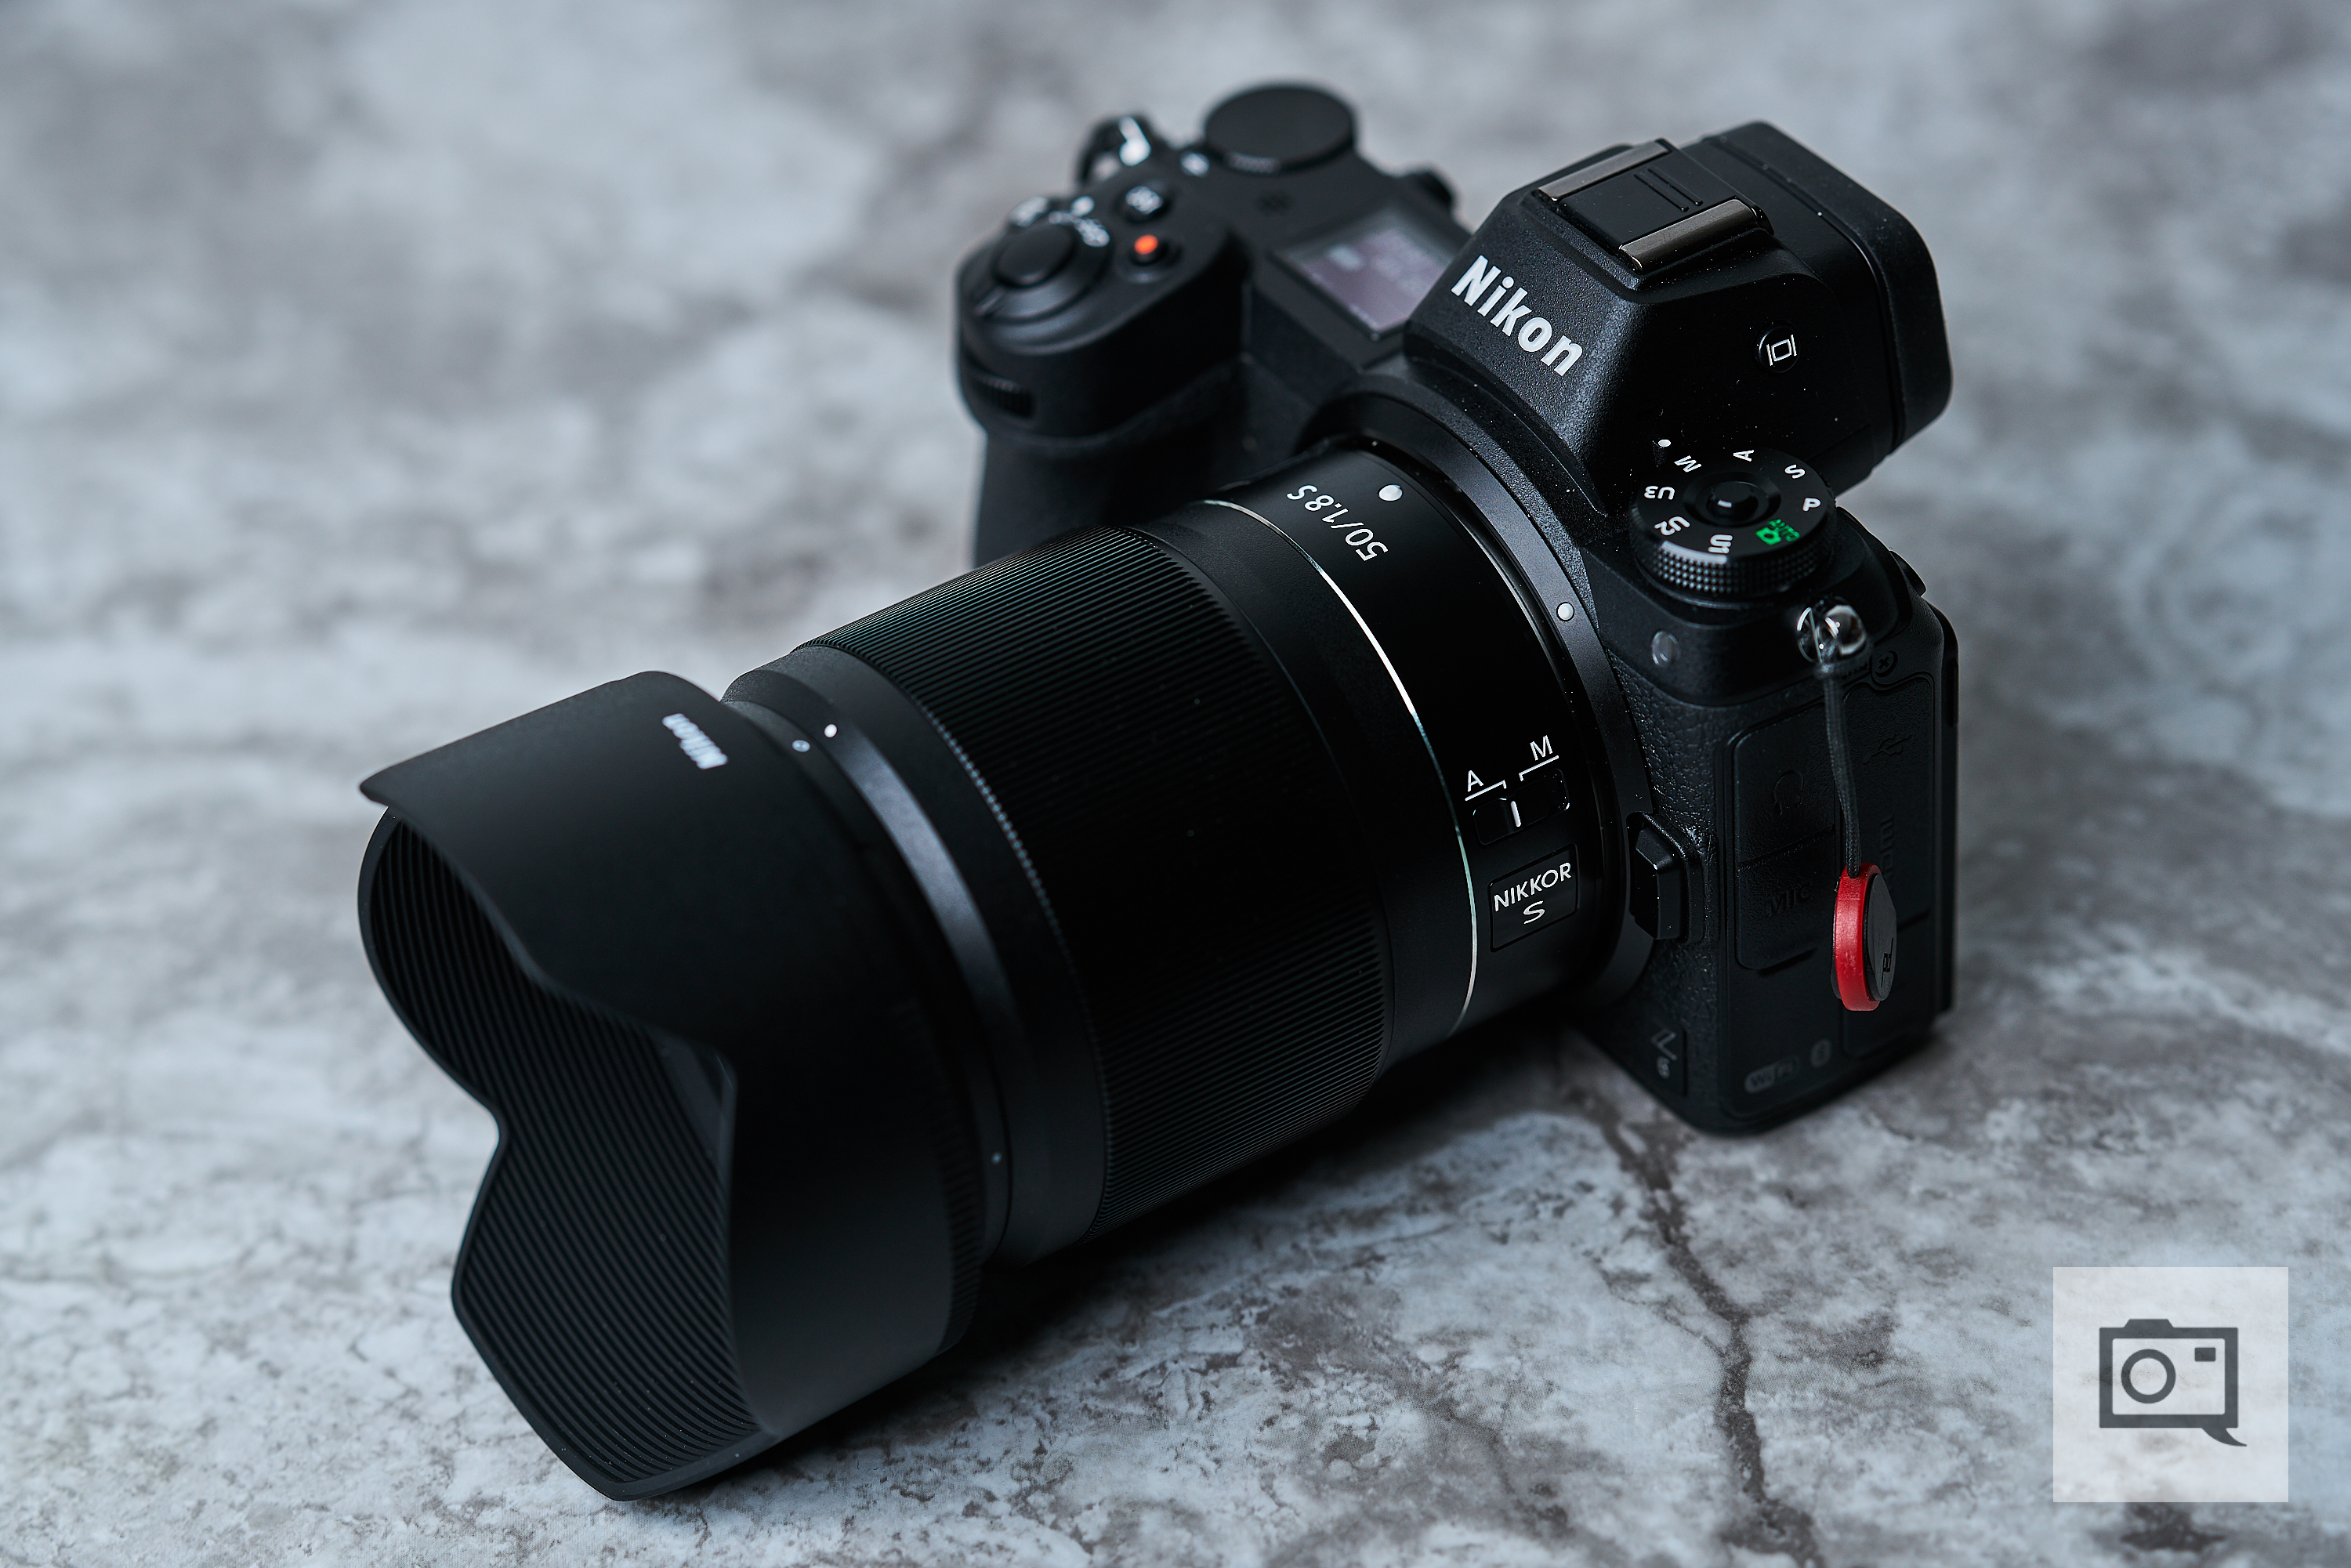 Review: Nikon Z6 (The Better of Nikon's Two Initial Mirrorless Cameras)